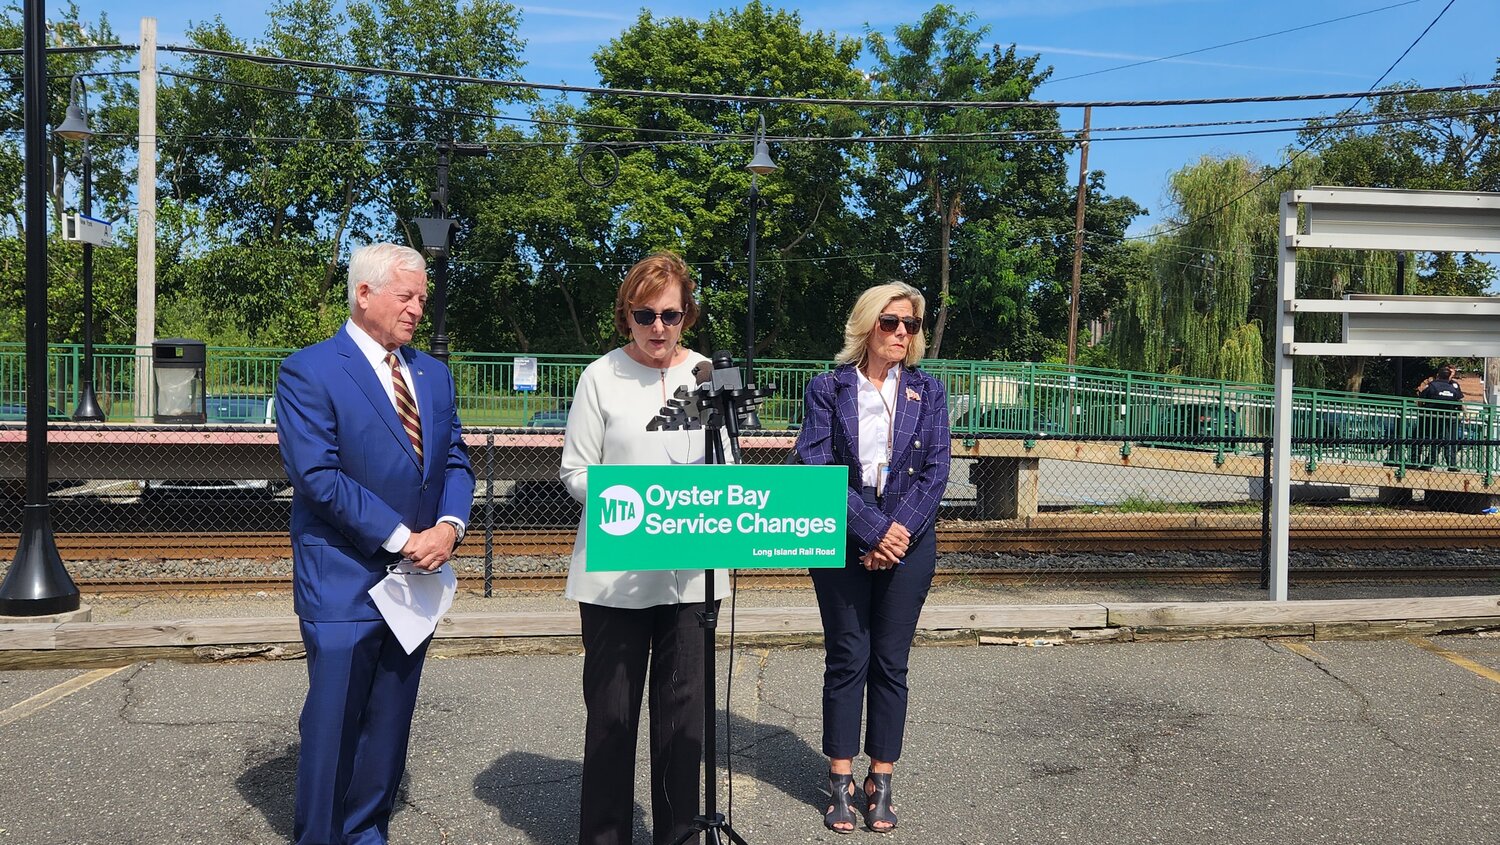 Assembleyman Charles Lavine, left, LIRR interim president Catherine Rinaldi and Glen Cove Mayor Pamela Panzenbeck spoke are hopeful the changes to the Oyster Bay branch will improve commutes for those who depend on the train’s service.